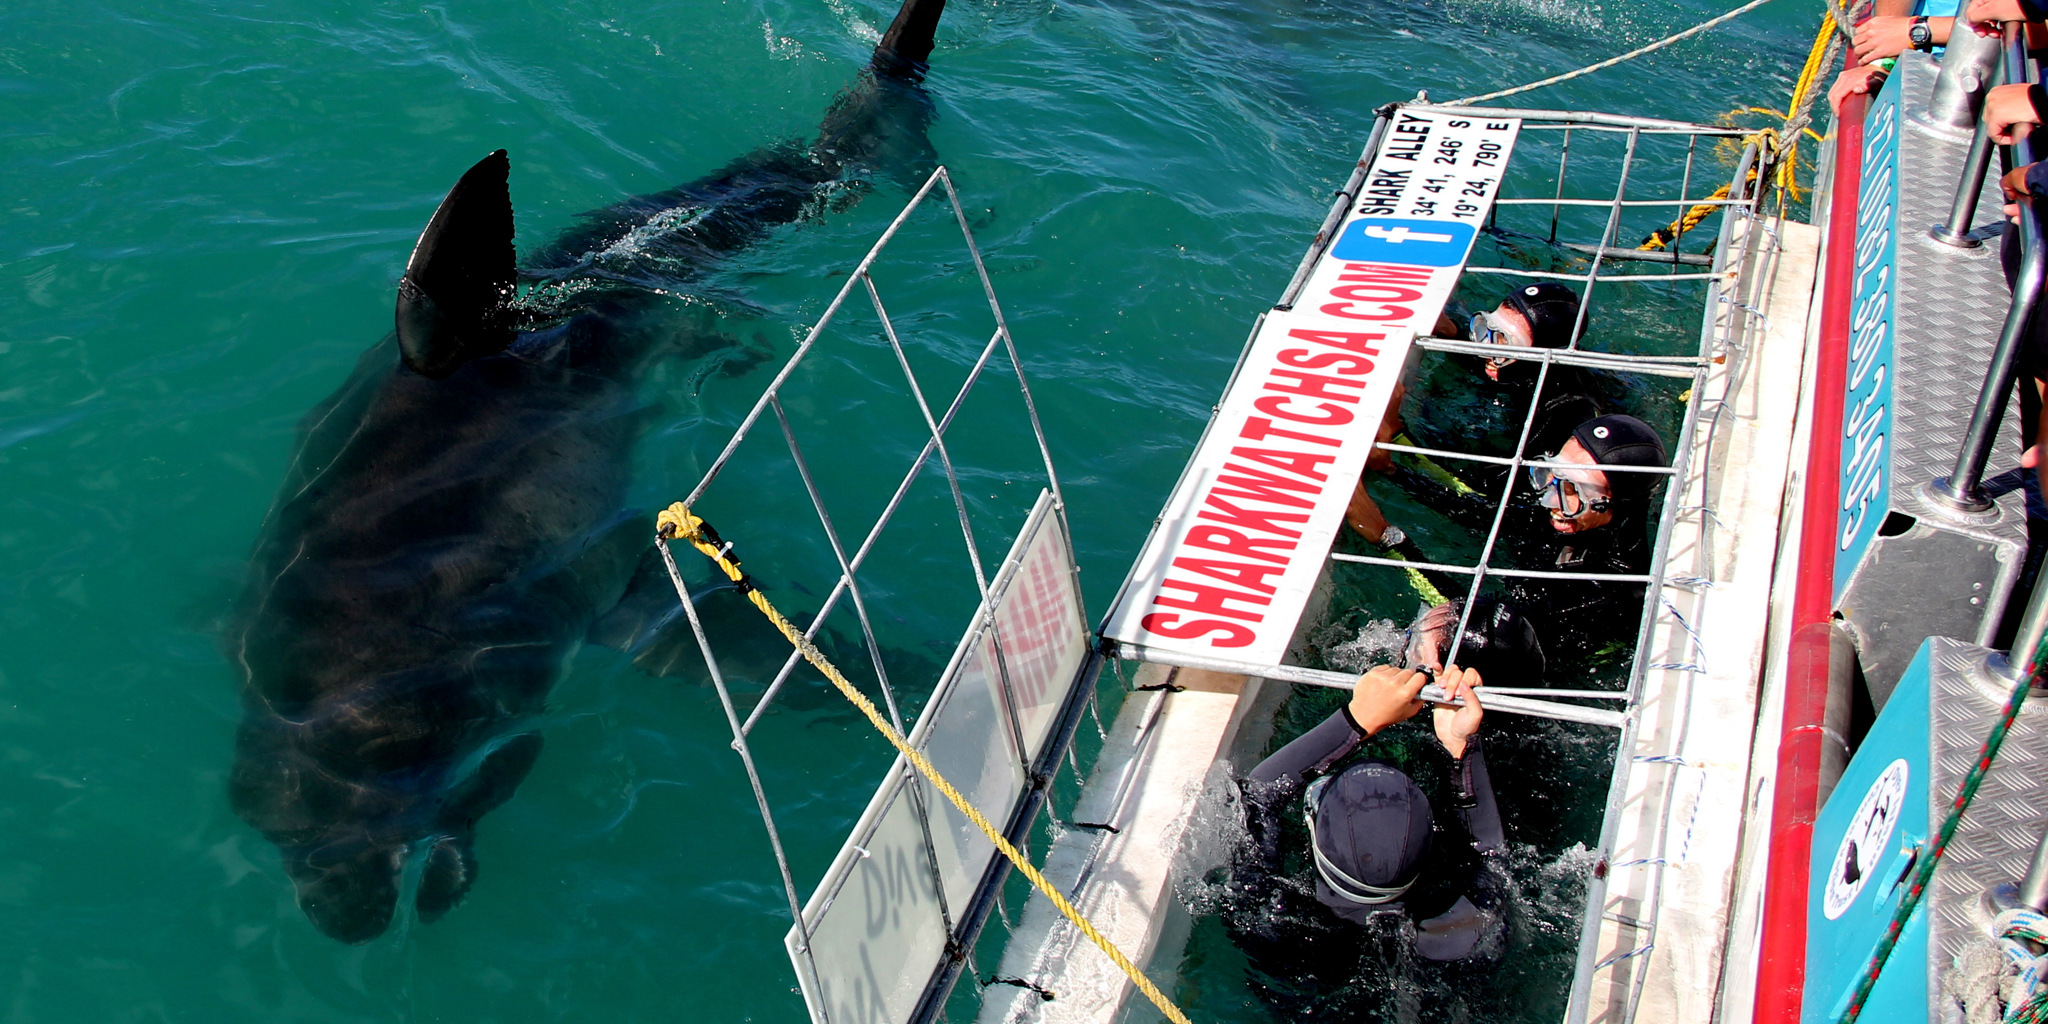 shark cage diving in gansbaai, south africa